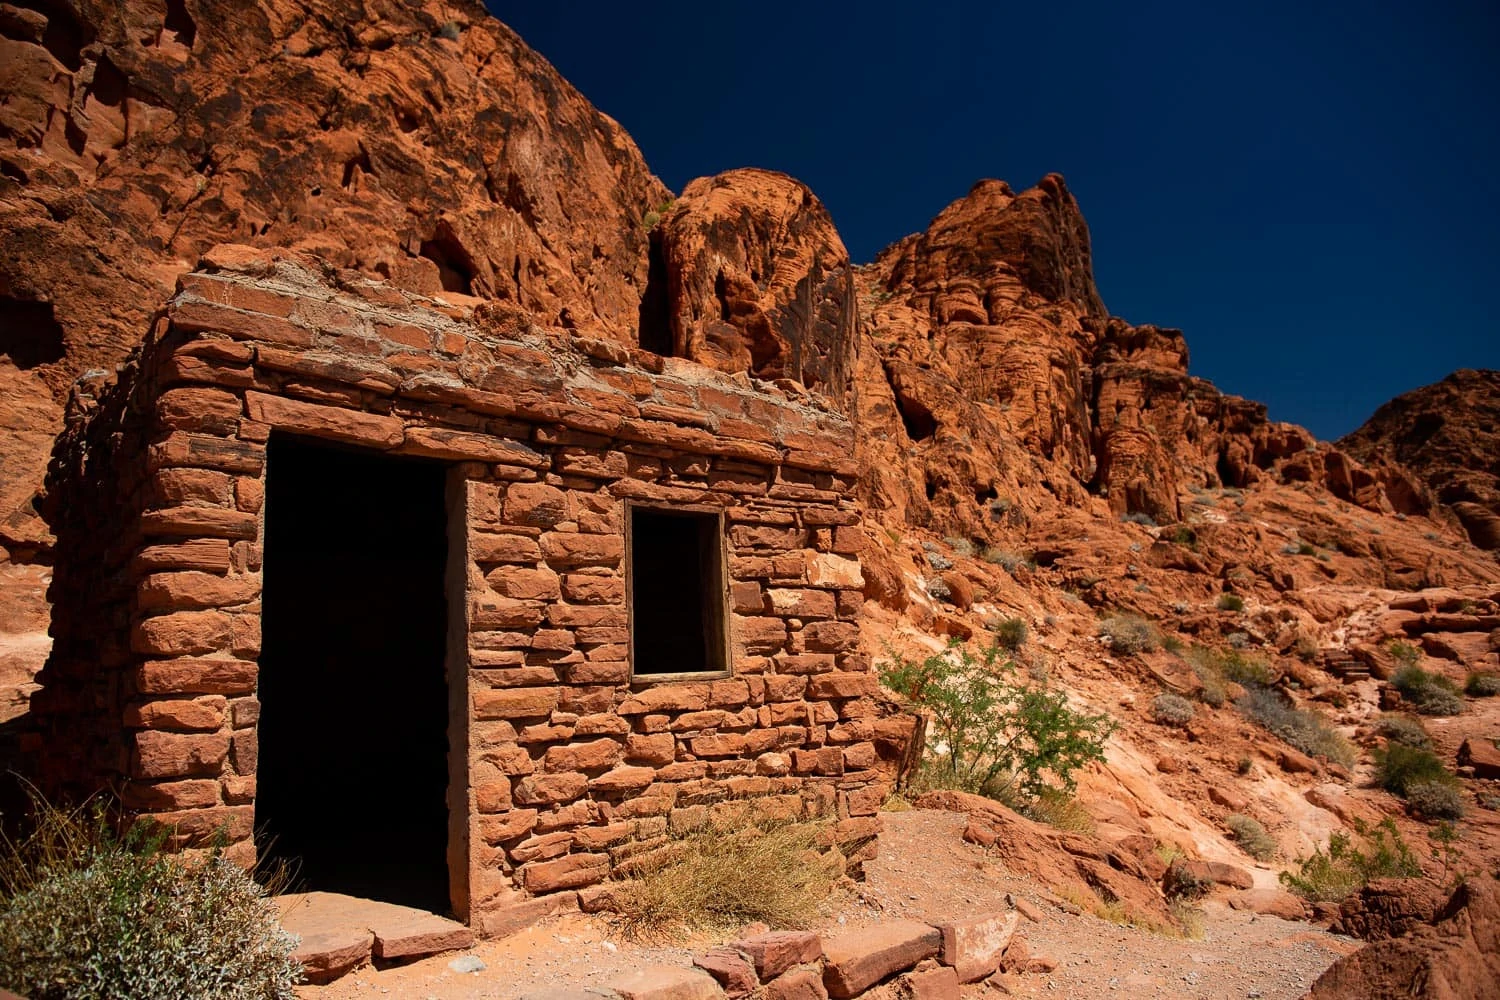 This historic cabin is one of the designated elopement ceremony locations in valley of fire state park.